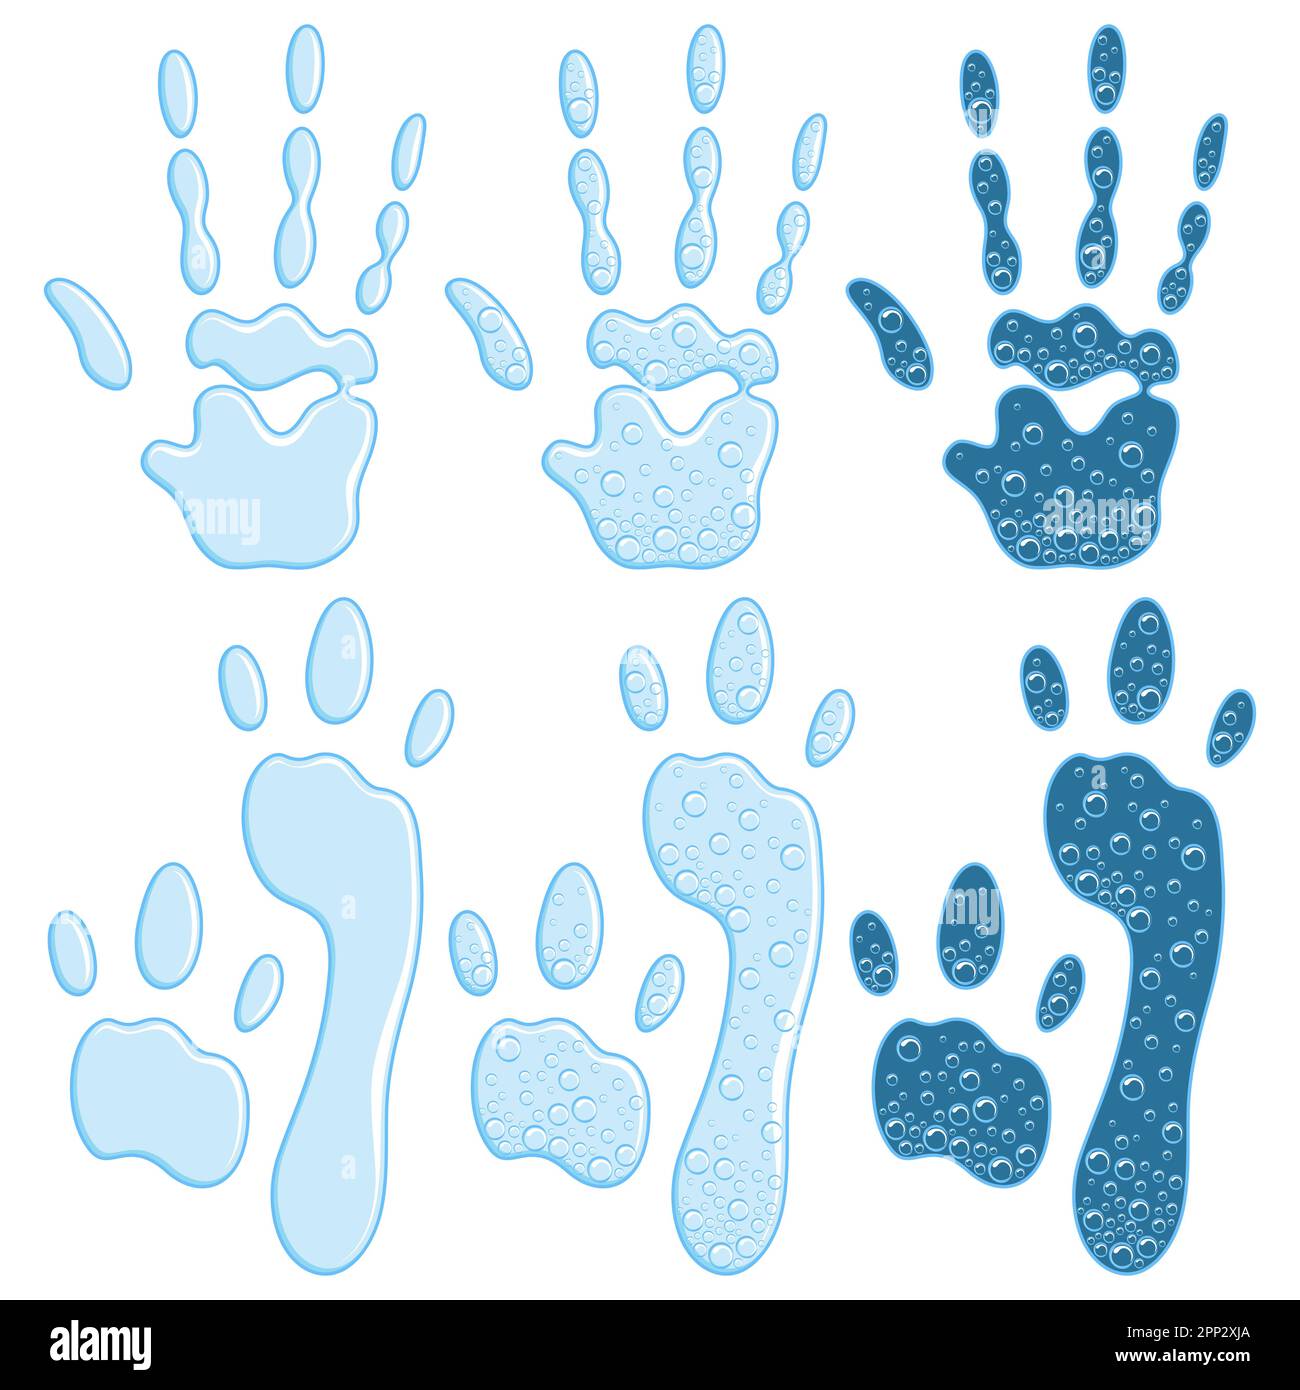 Set of color illustrations with alien footprint and handprint. Isolated vector objects on white background. Stock Vector